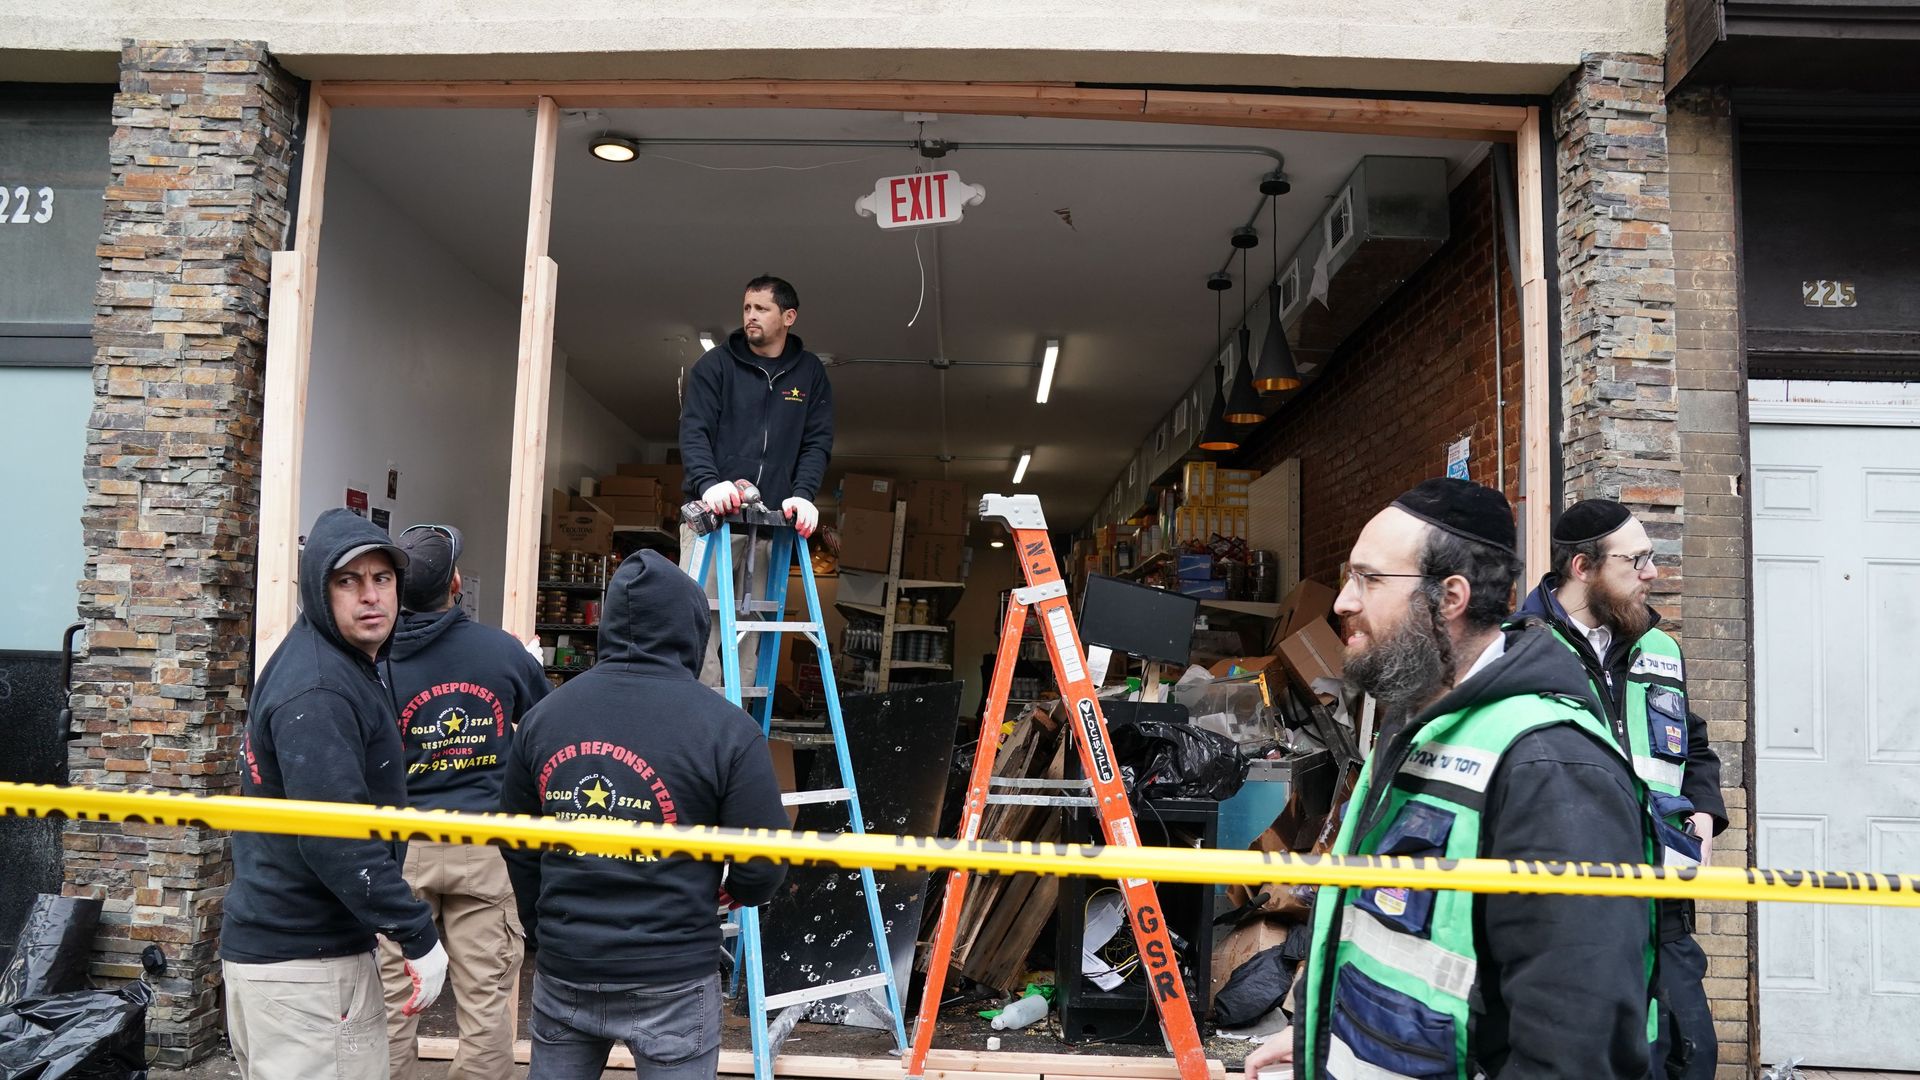 In this image, men wearing safety vests and hoodies stand in front of a large, open storefront window and one man stands on a ladder